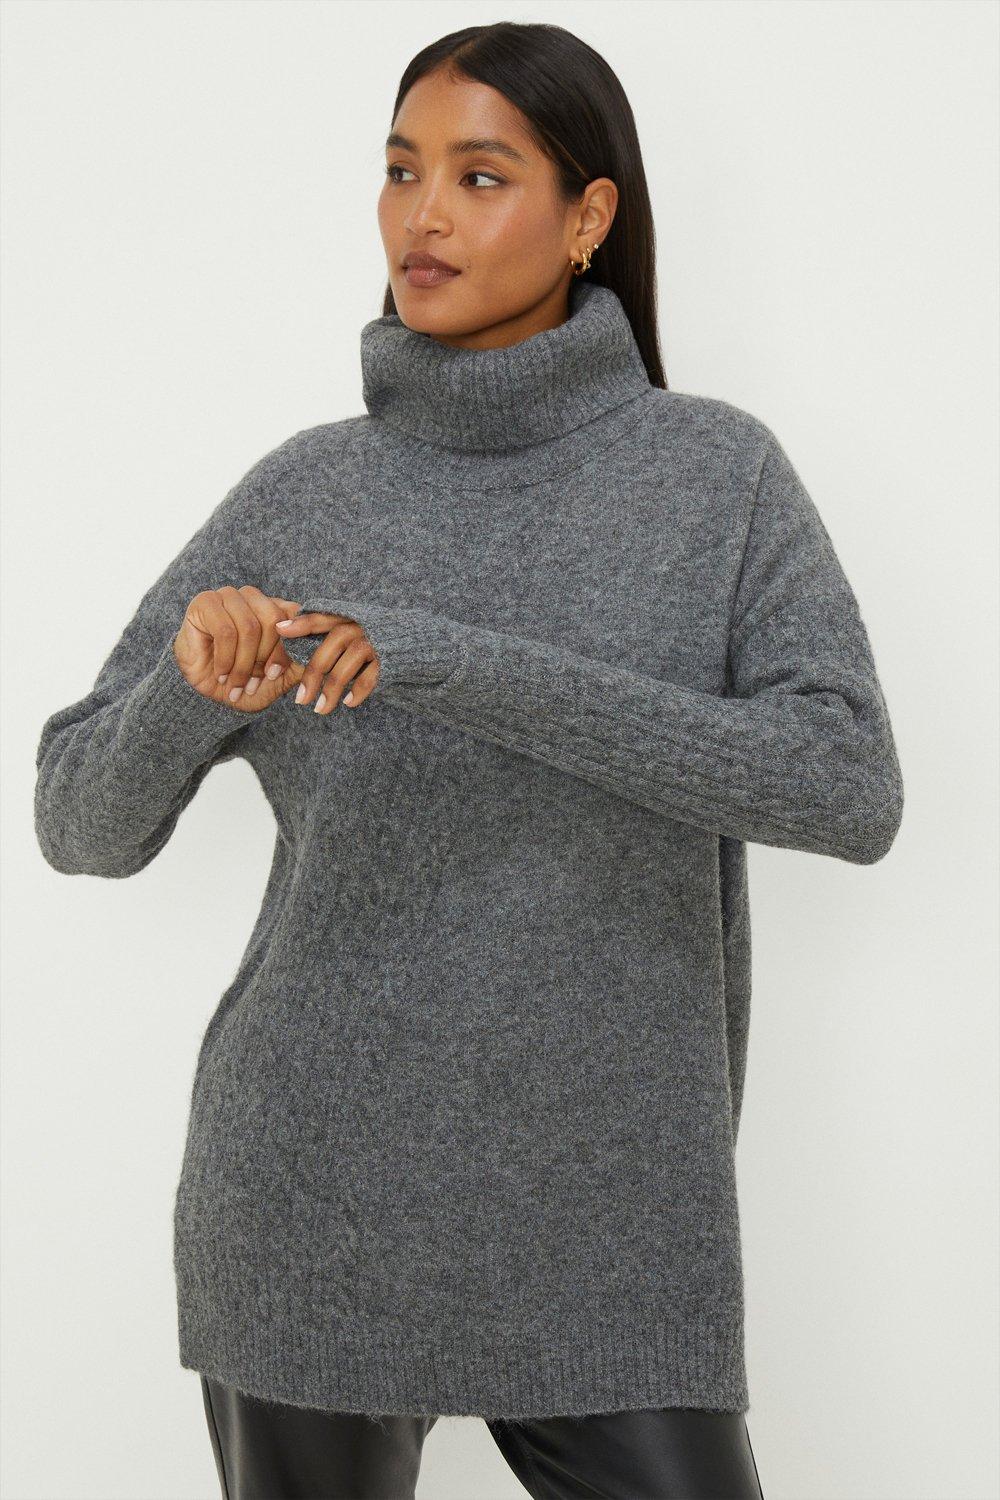 Women's Longline Angle Cable Jumper - grey marl - S